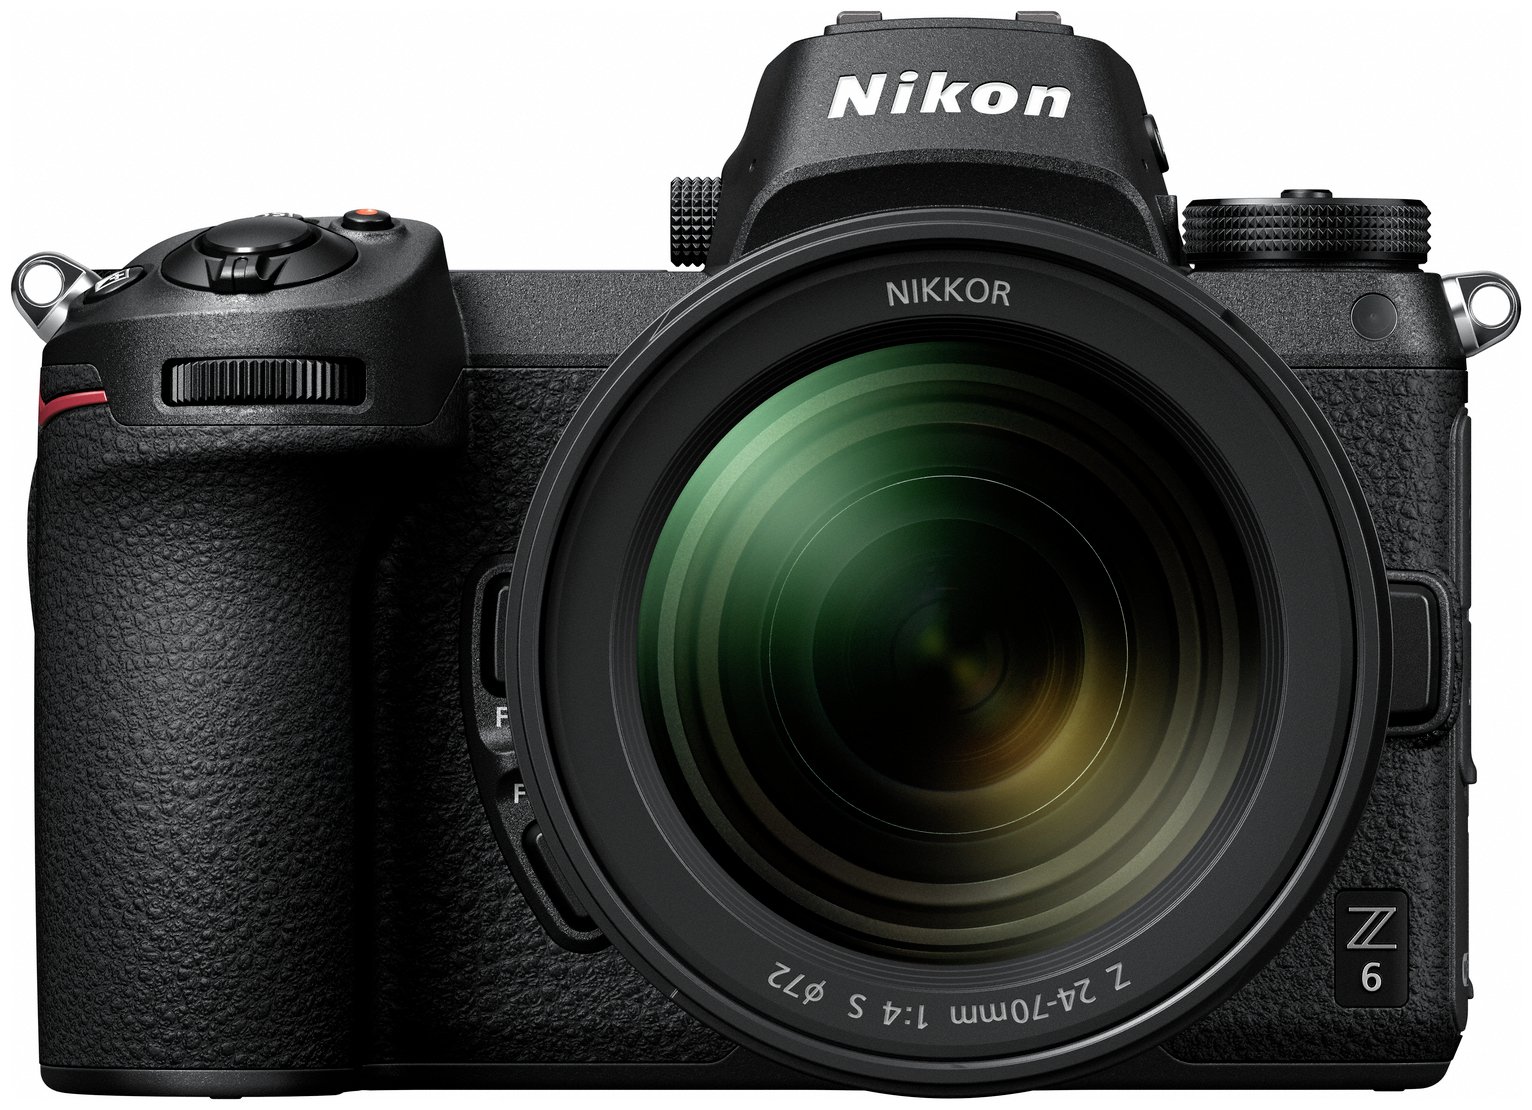 Nikon Z6 Mirrorless with Z 24-70mm Lens and FTZ Adaptor Review